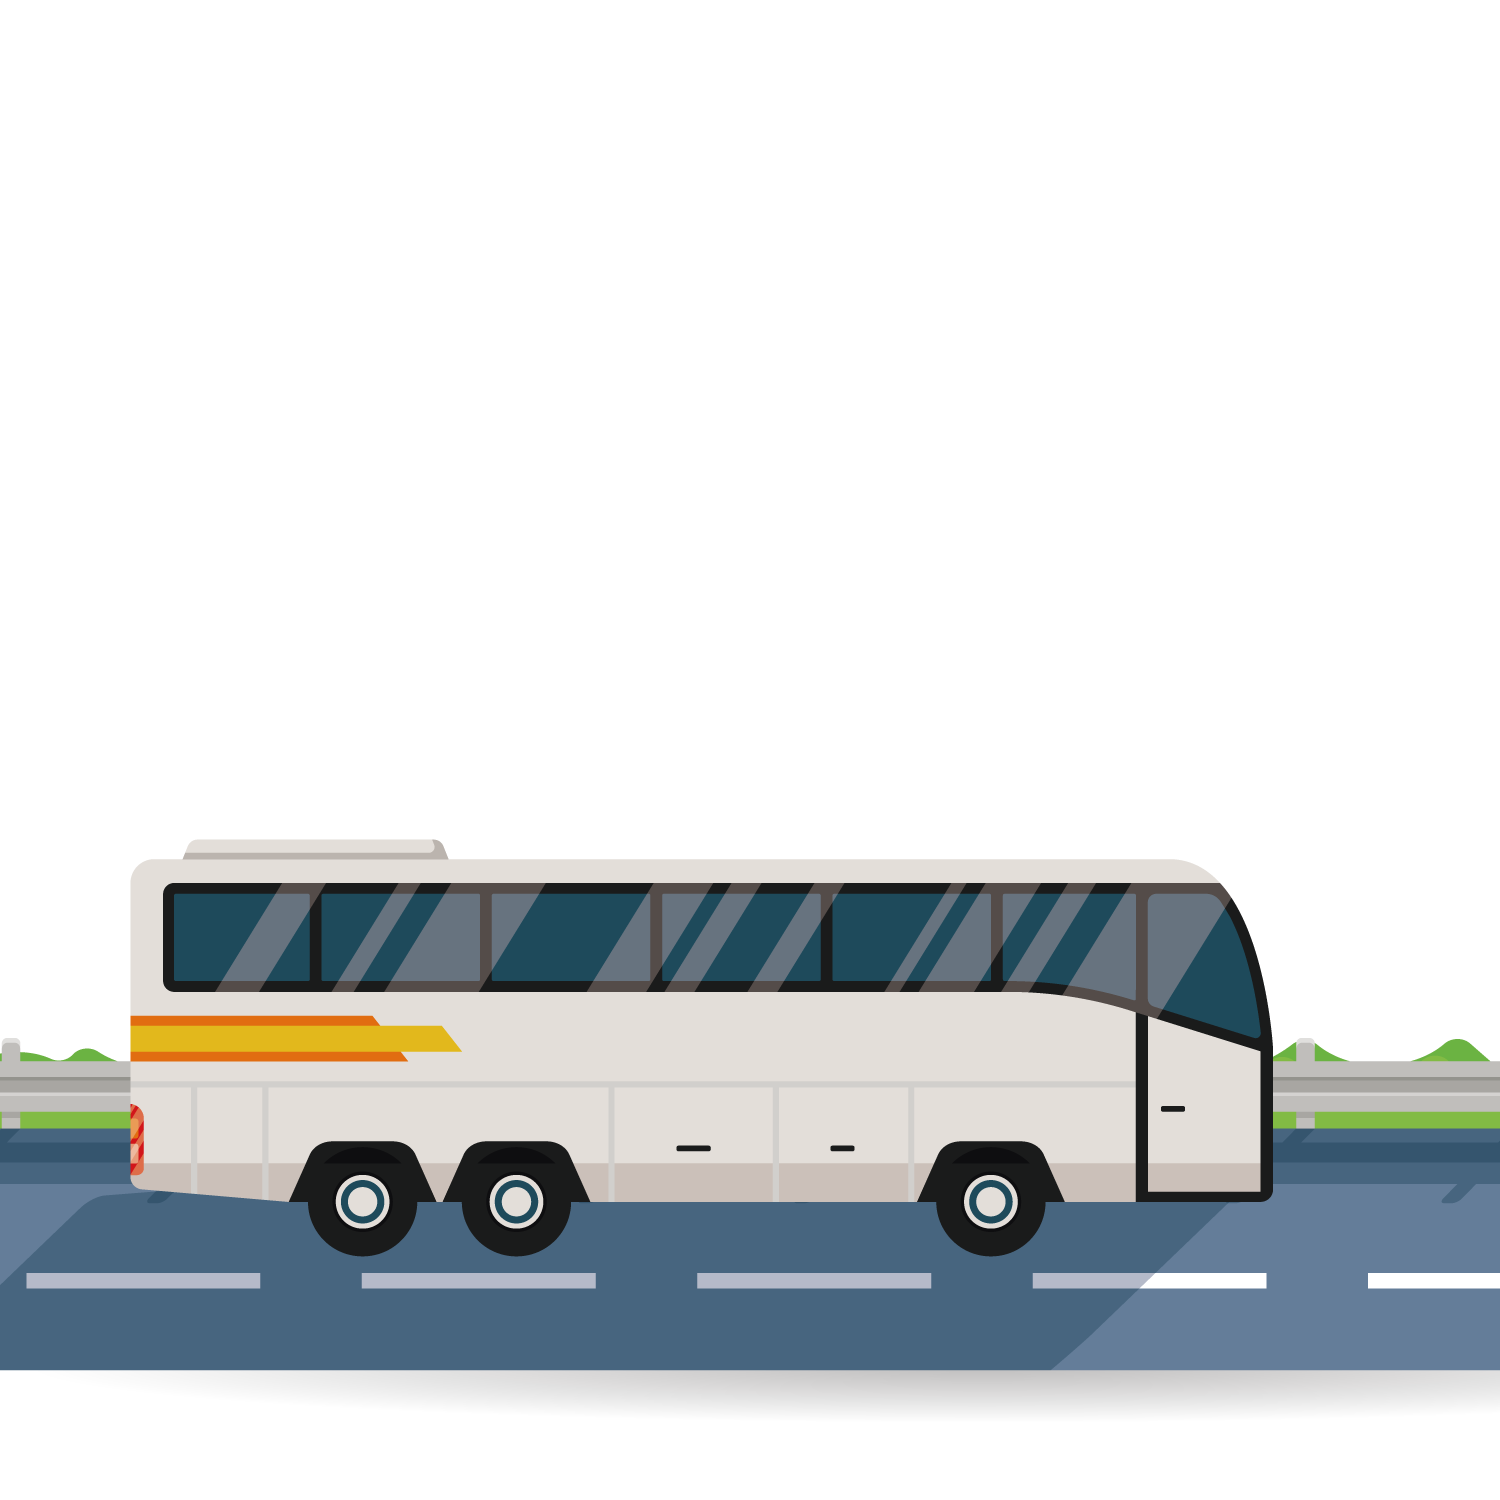 Bus Vector Road Car Free HQ Image Clipart